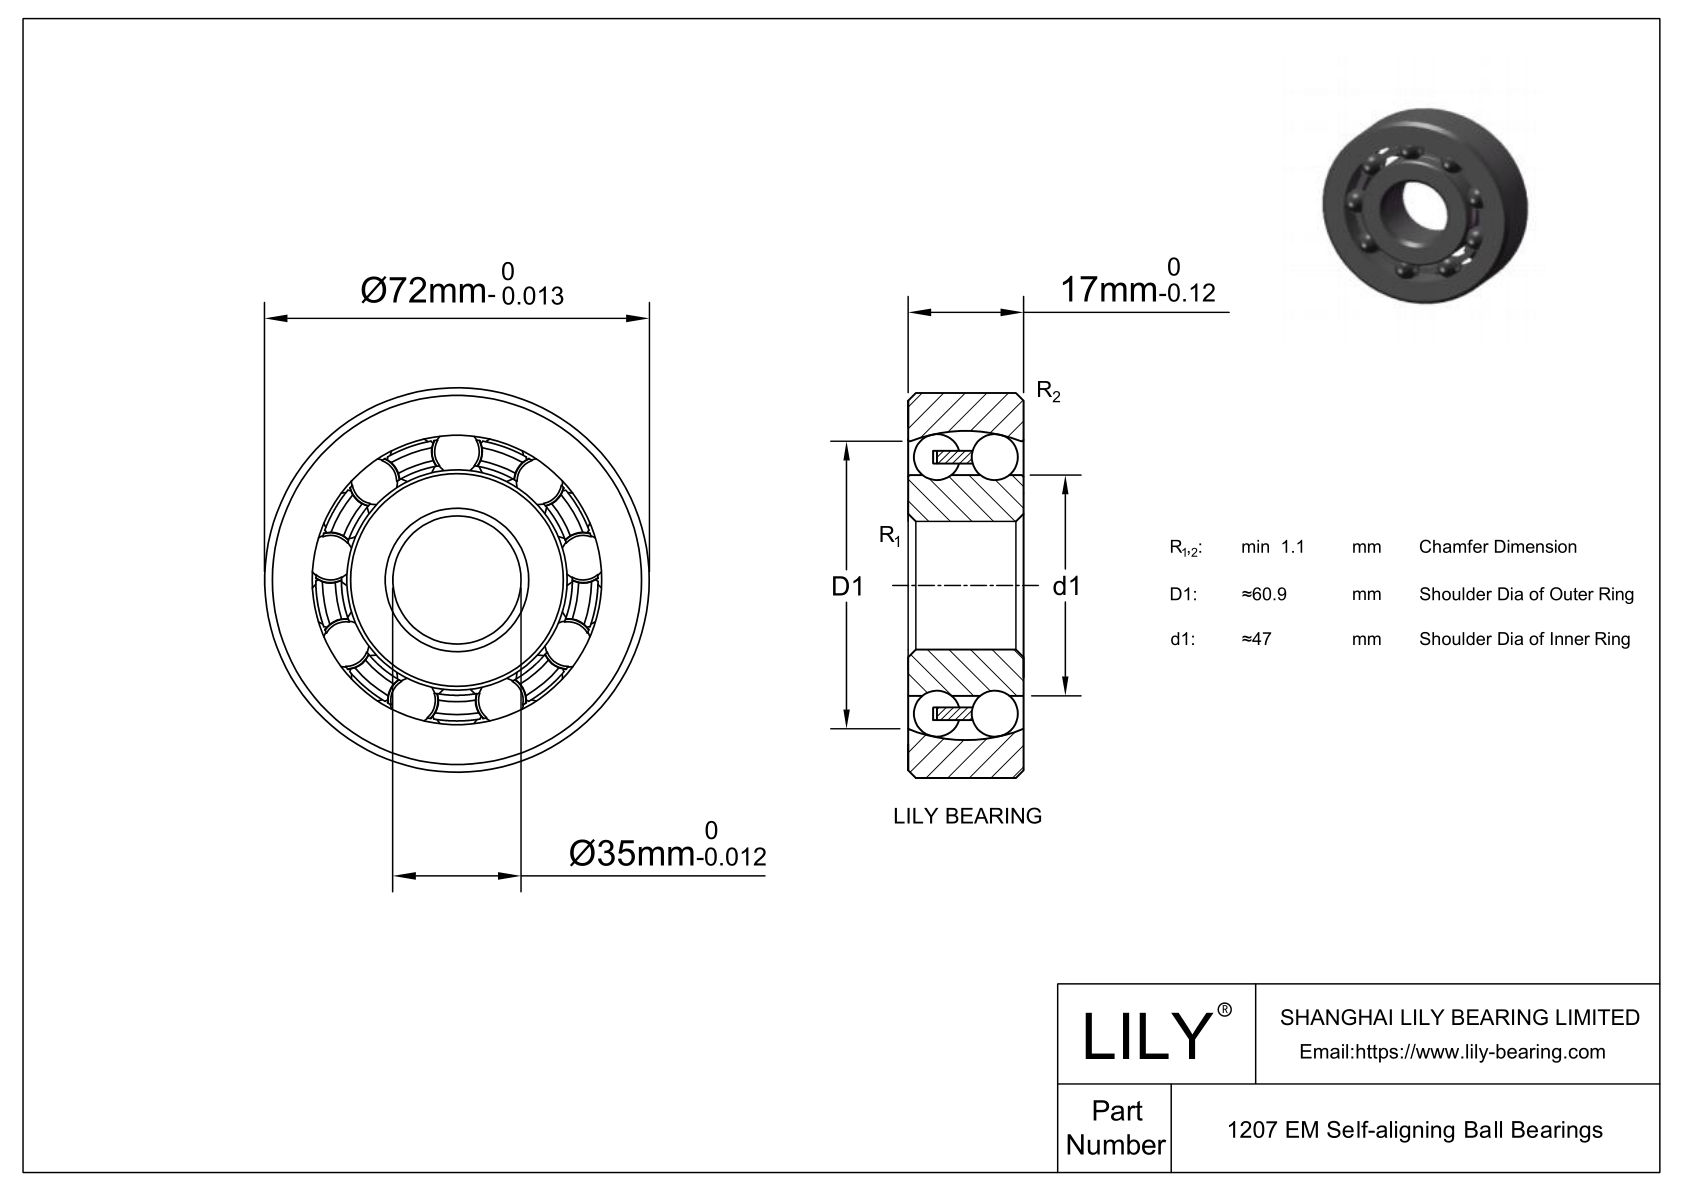 S1207 EM Stainless Steel Self Aligning Ball Bearings cad drawing